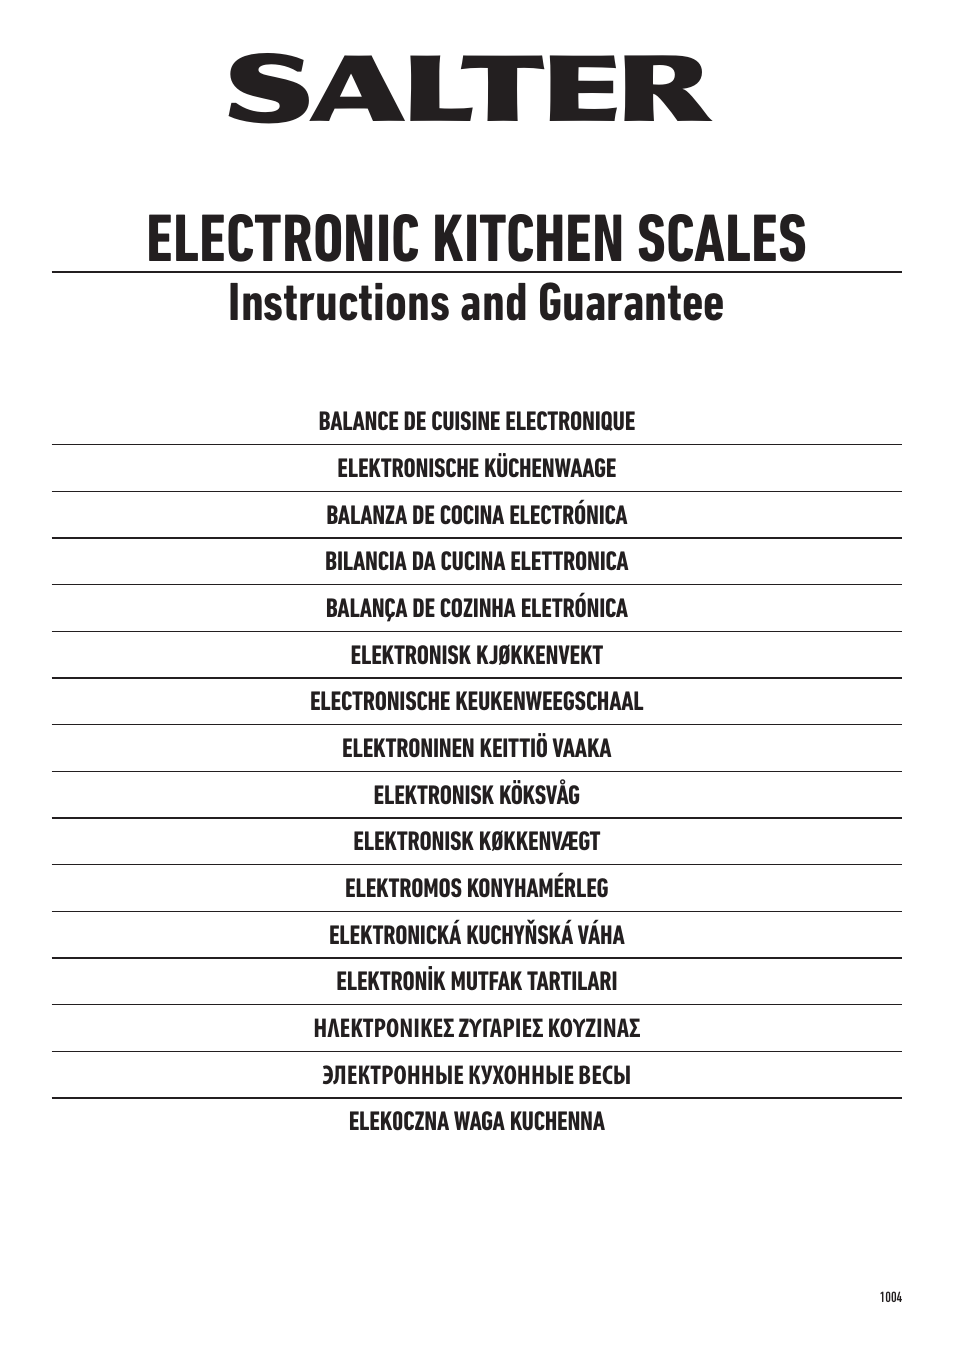 1004 SSDR Stainless Steel Electronic Kitchen Scale